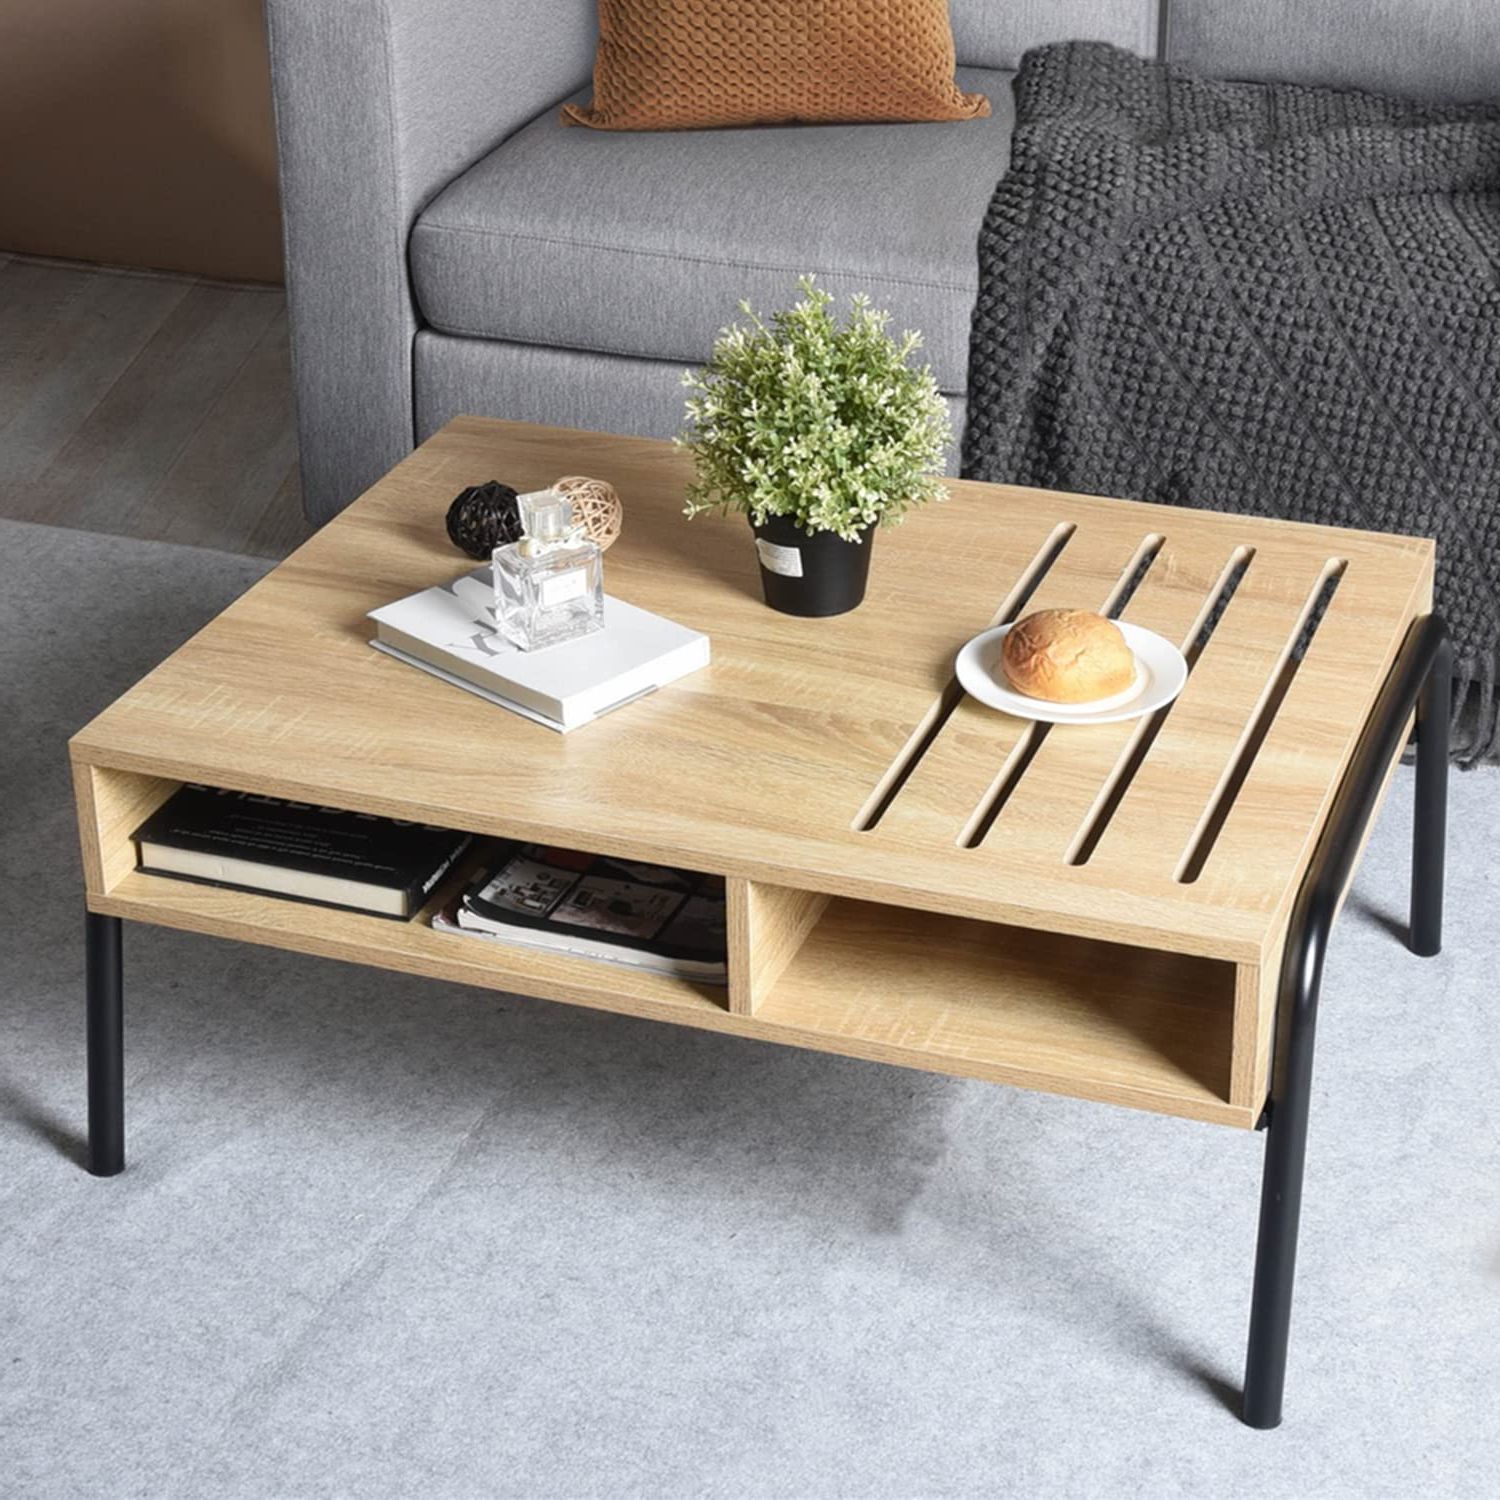 Amazon: Furniturer Modern Coffee Table With Open Storage Shelf,  Rectangle Tabletop Wood Tea Cocktail Living Room Center Table, Oak : Home &  Kitchen For Most Popular Coffee Tables With Open Storage Shelves (Photo 4 of 10)